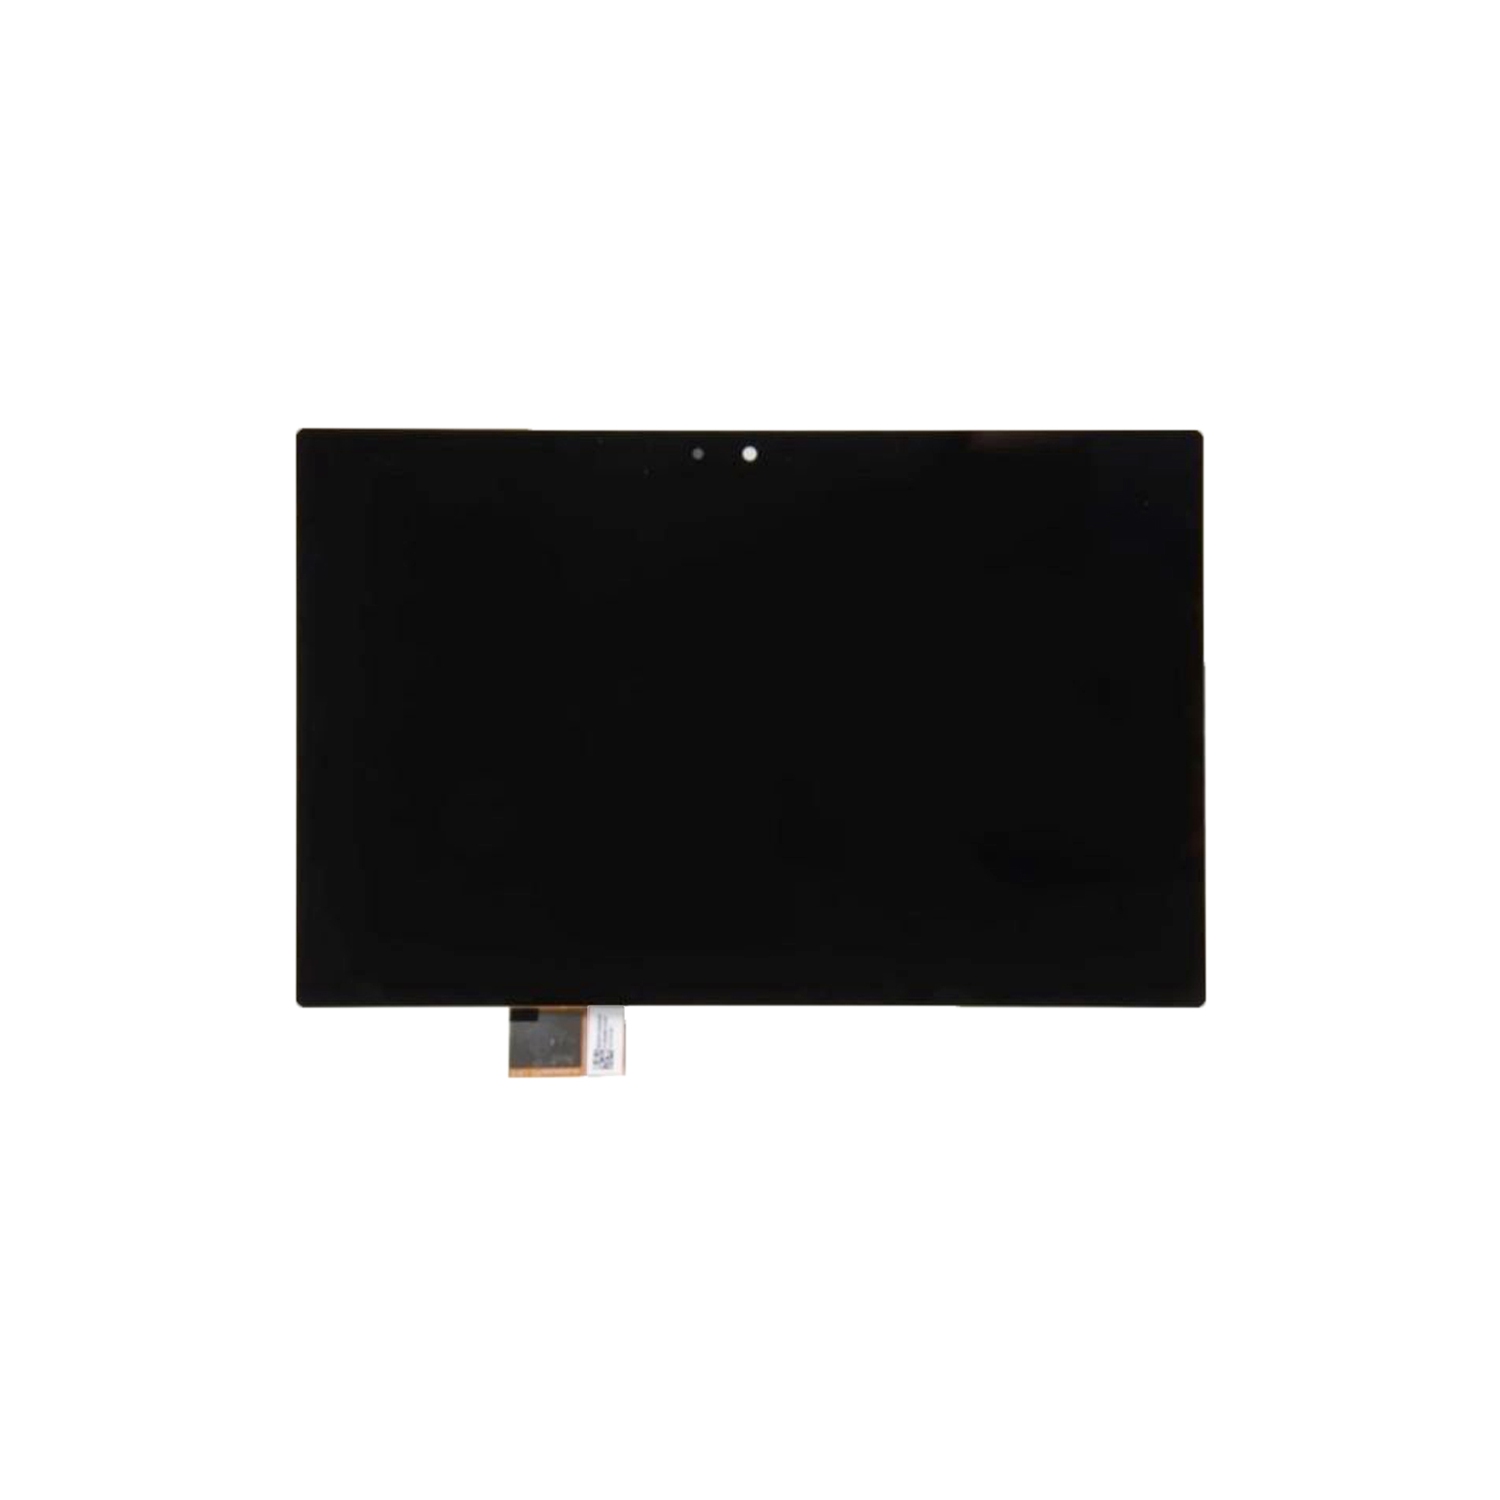 Sony Tablet Z SGP311 LCD Screen Display And Digitizer Touch Screen Full Assembly - Black